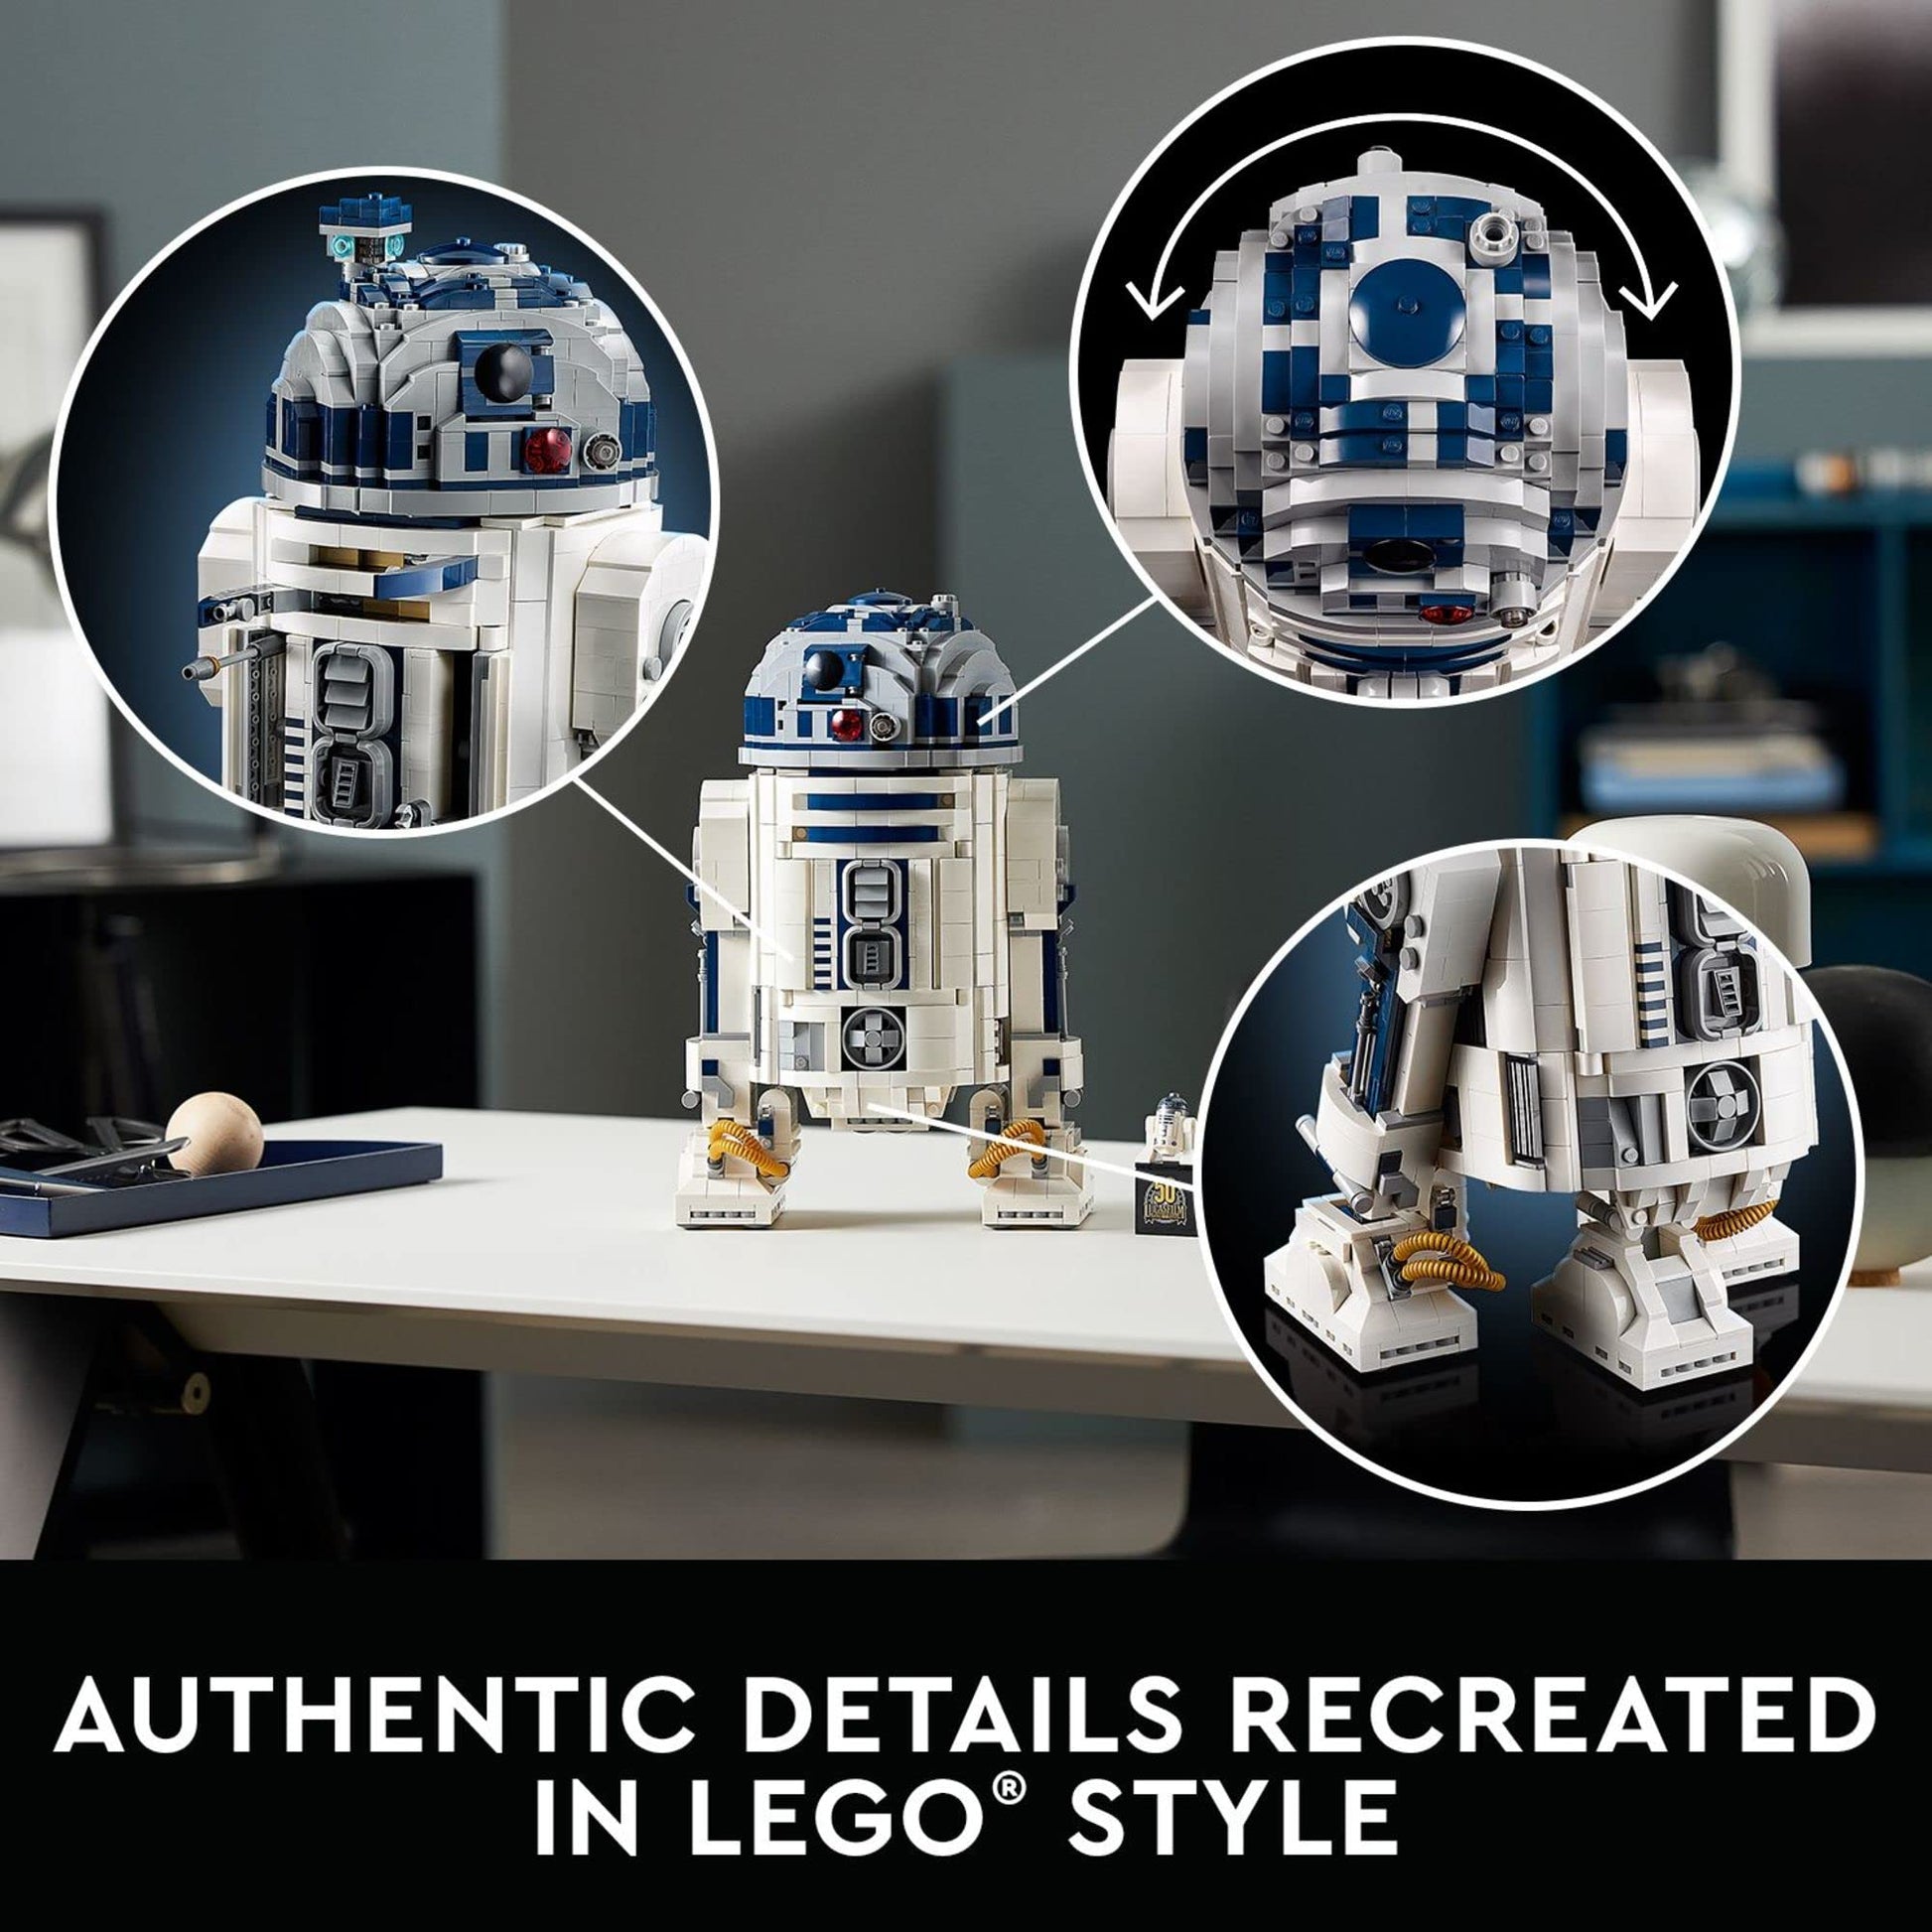 LEGO Star Wars R2-D2 75308 Building Set for Adults (2,314 Pieces) - Zippigames